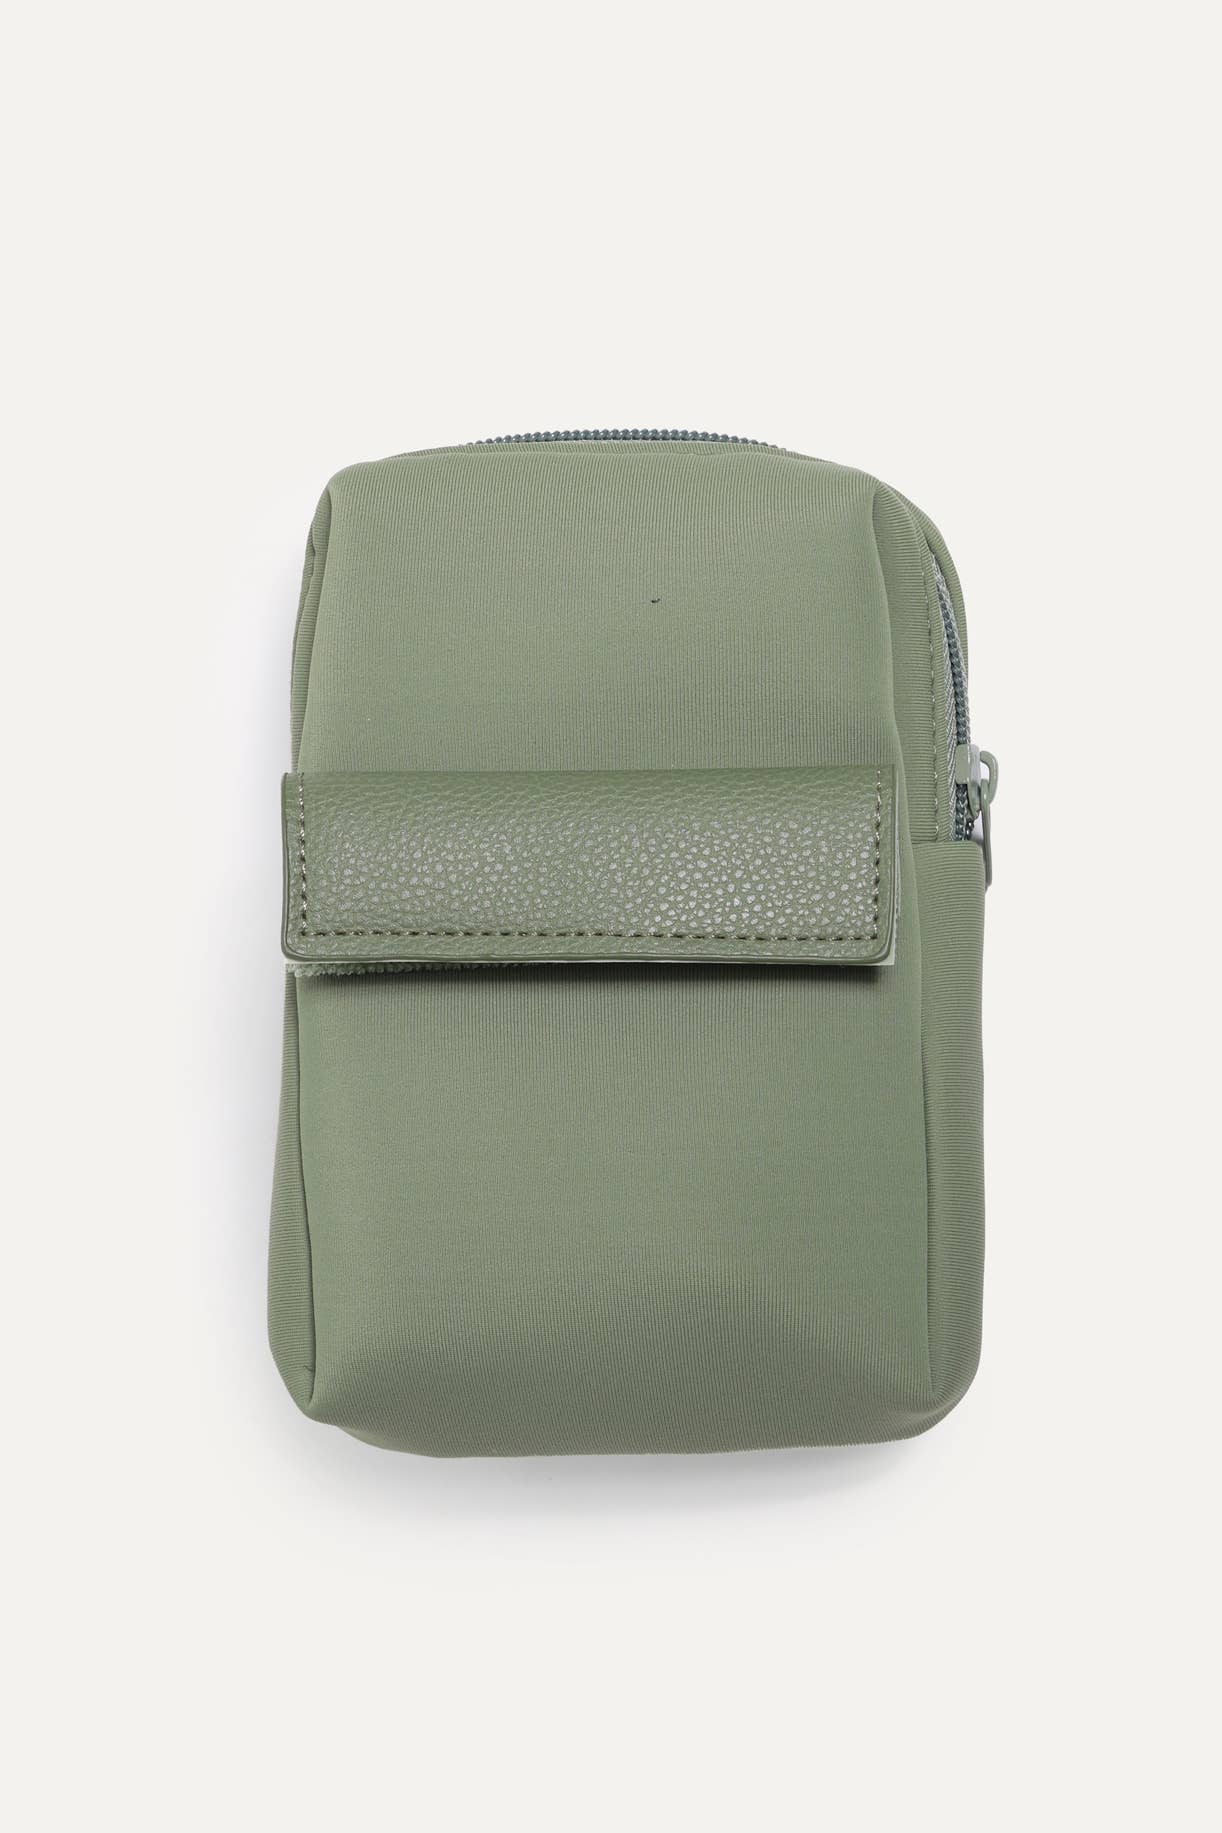 Go with Ease Pouch: Small / Sage